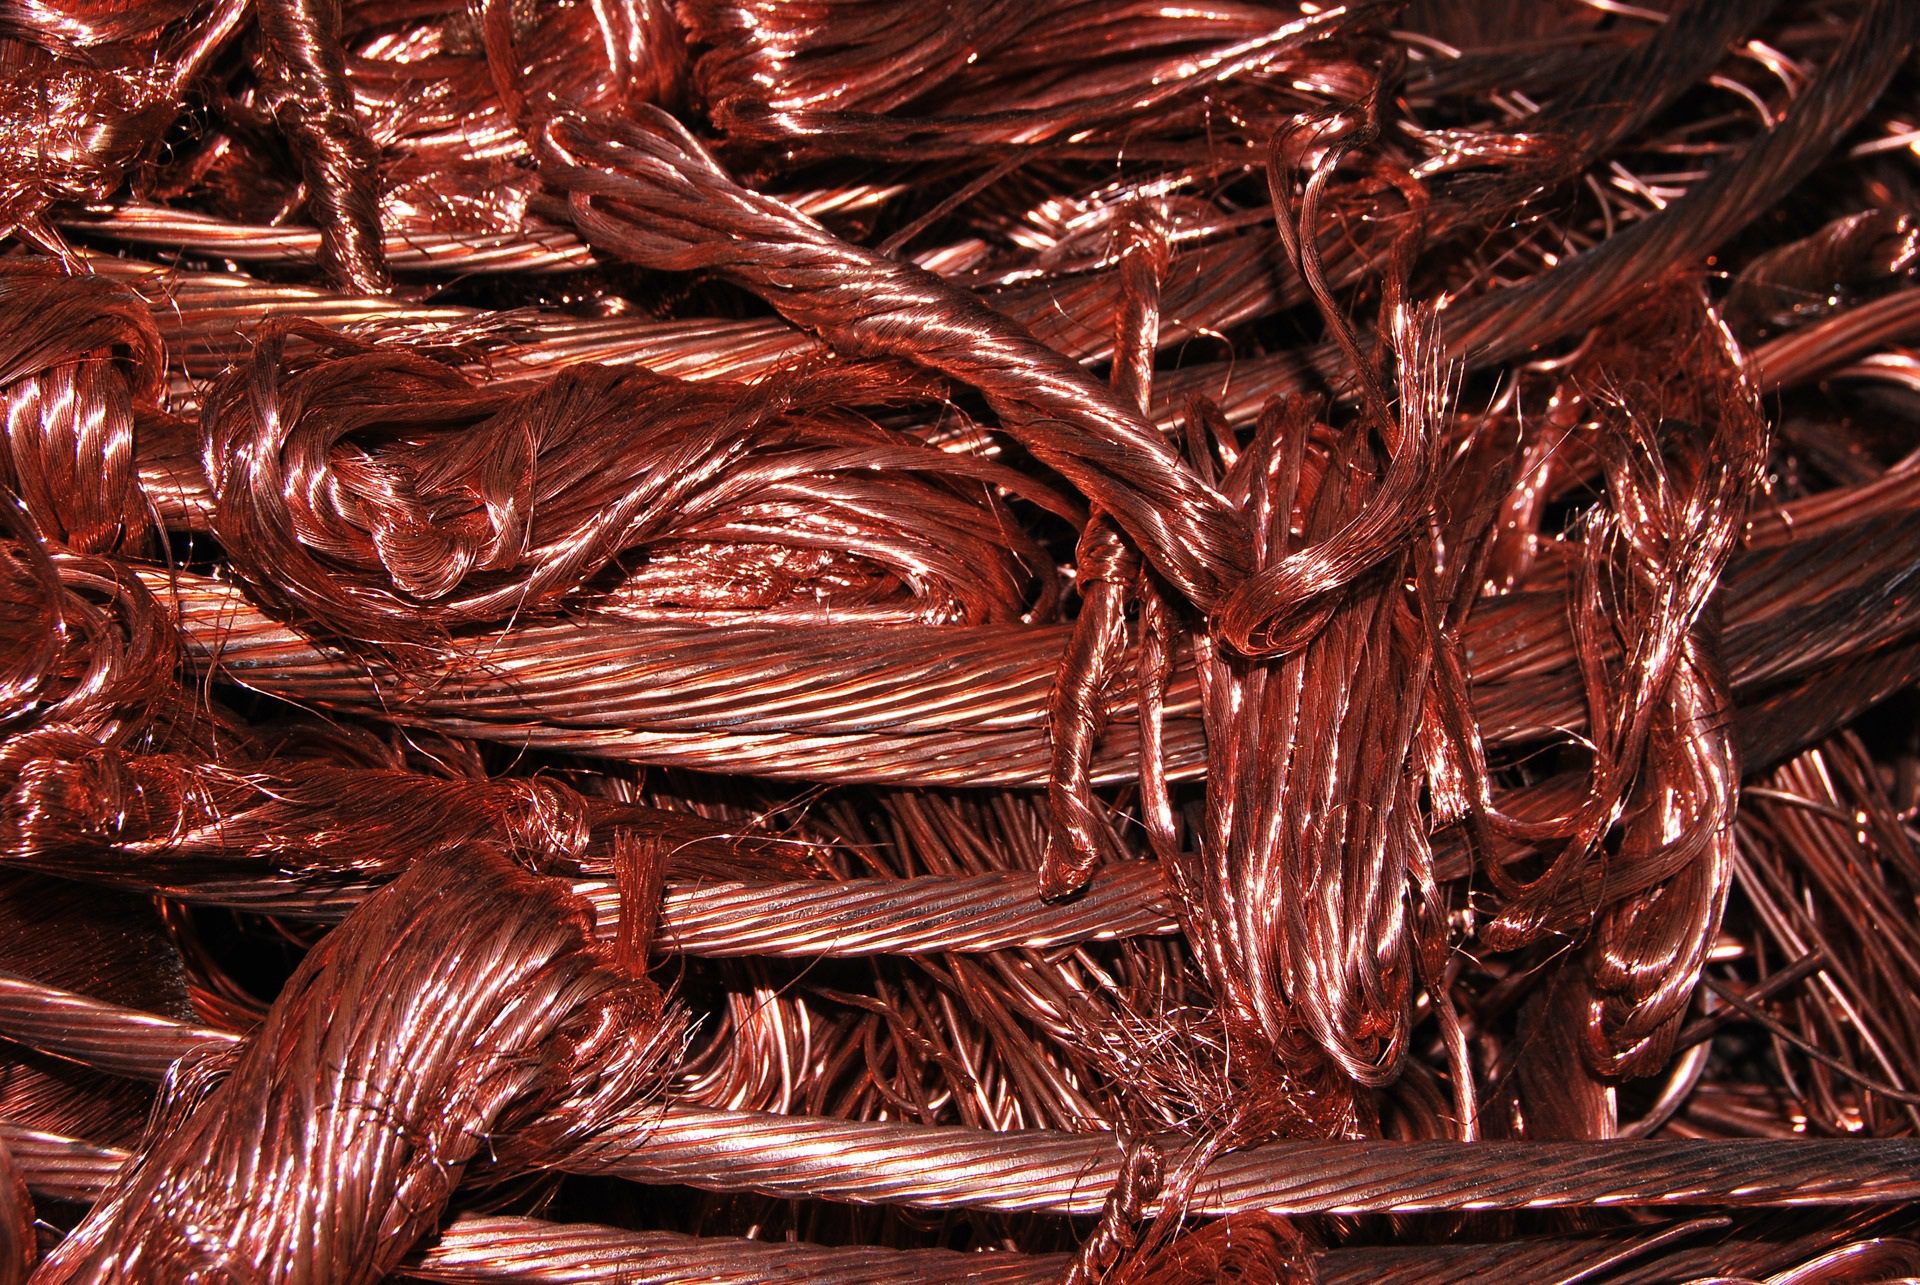 interesting facts about copper